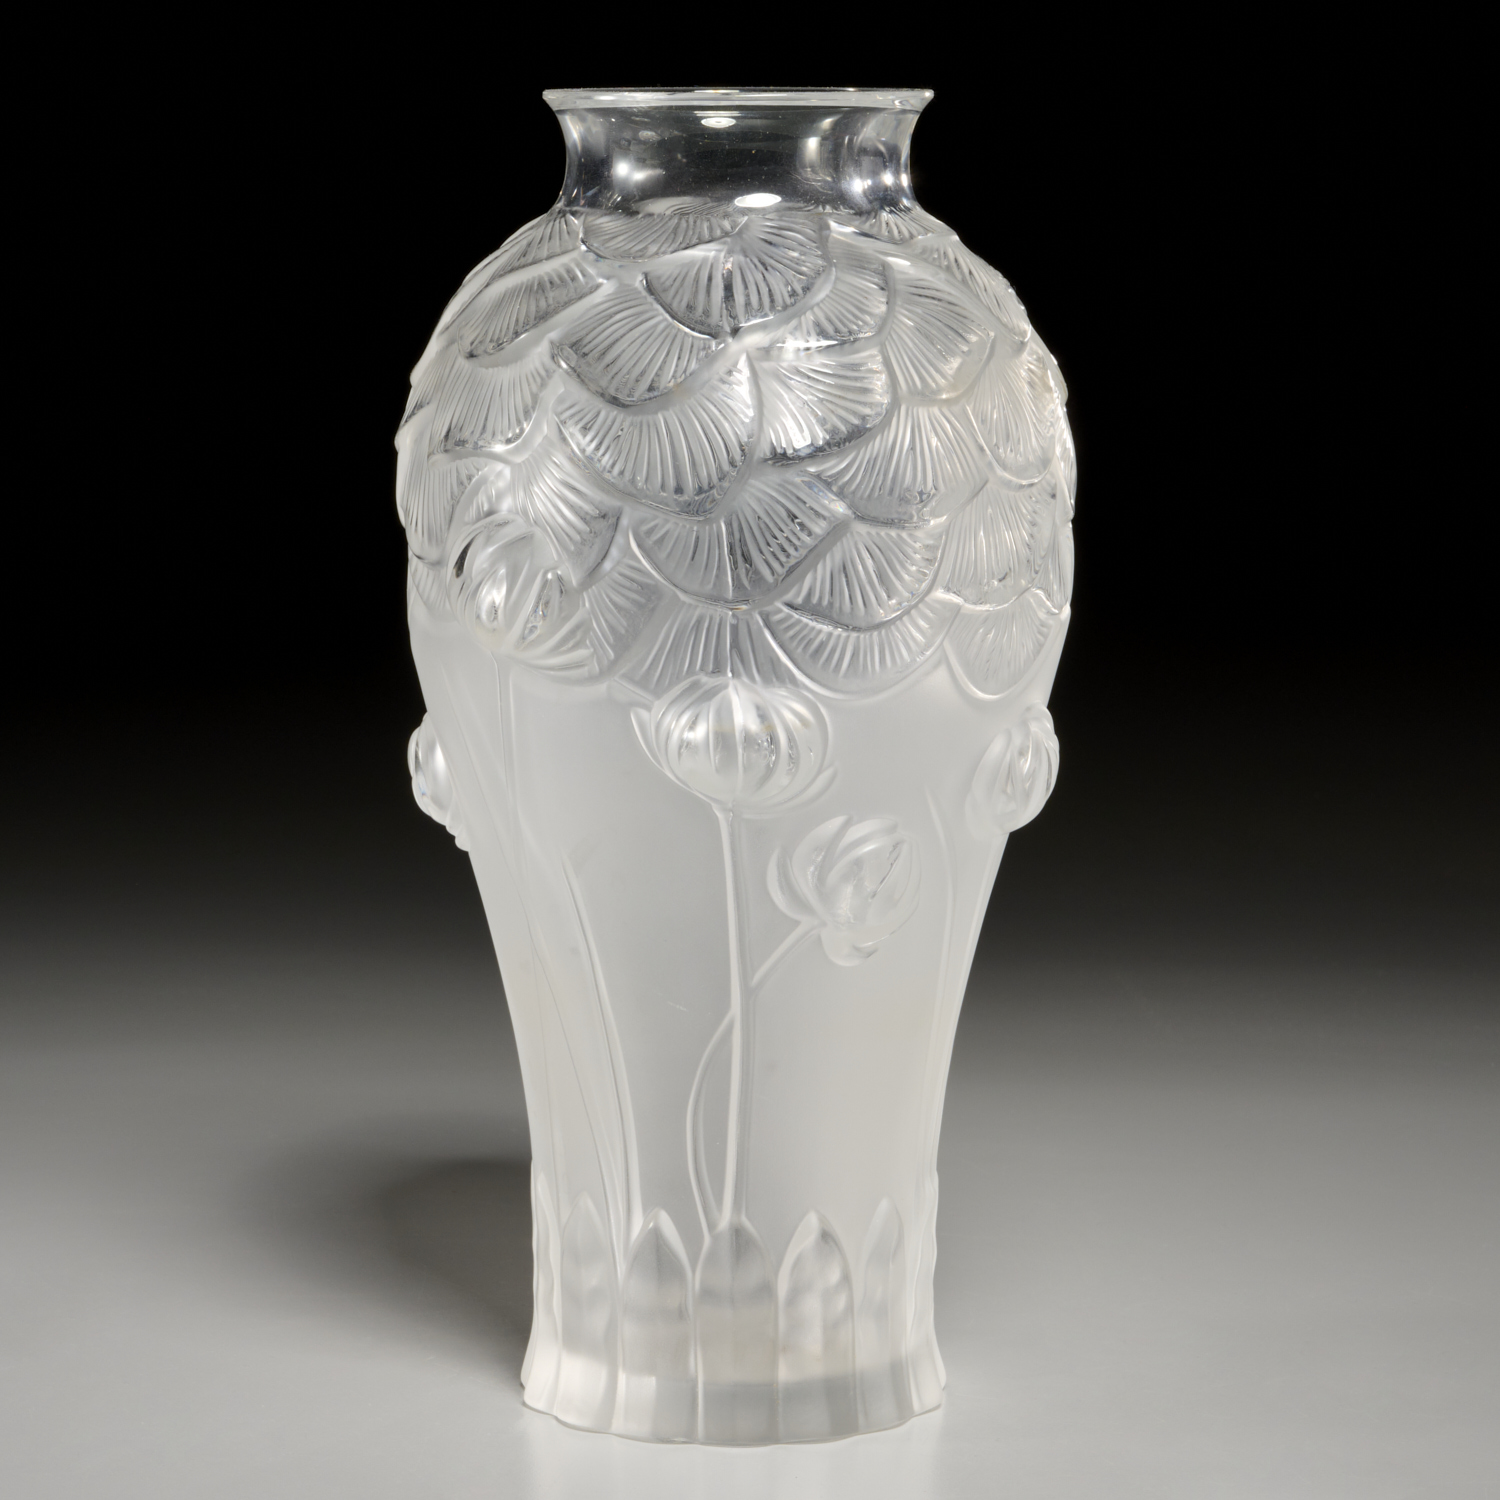 RENE LALIQUE, 'GIVERNY' VASE 20th